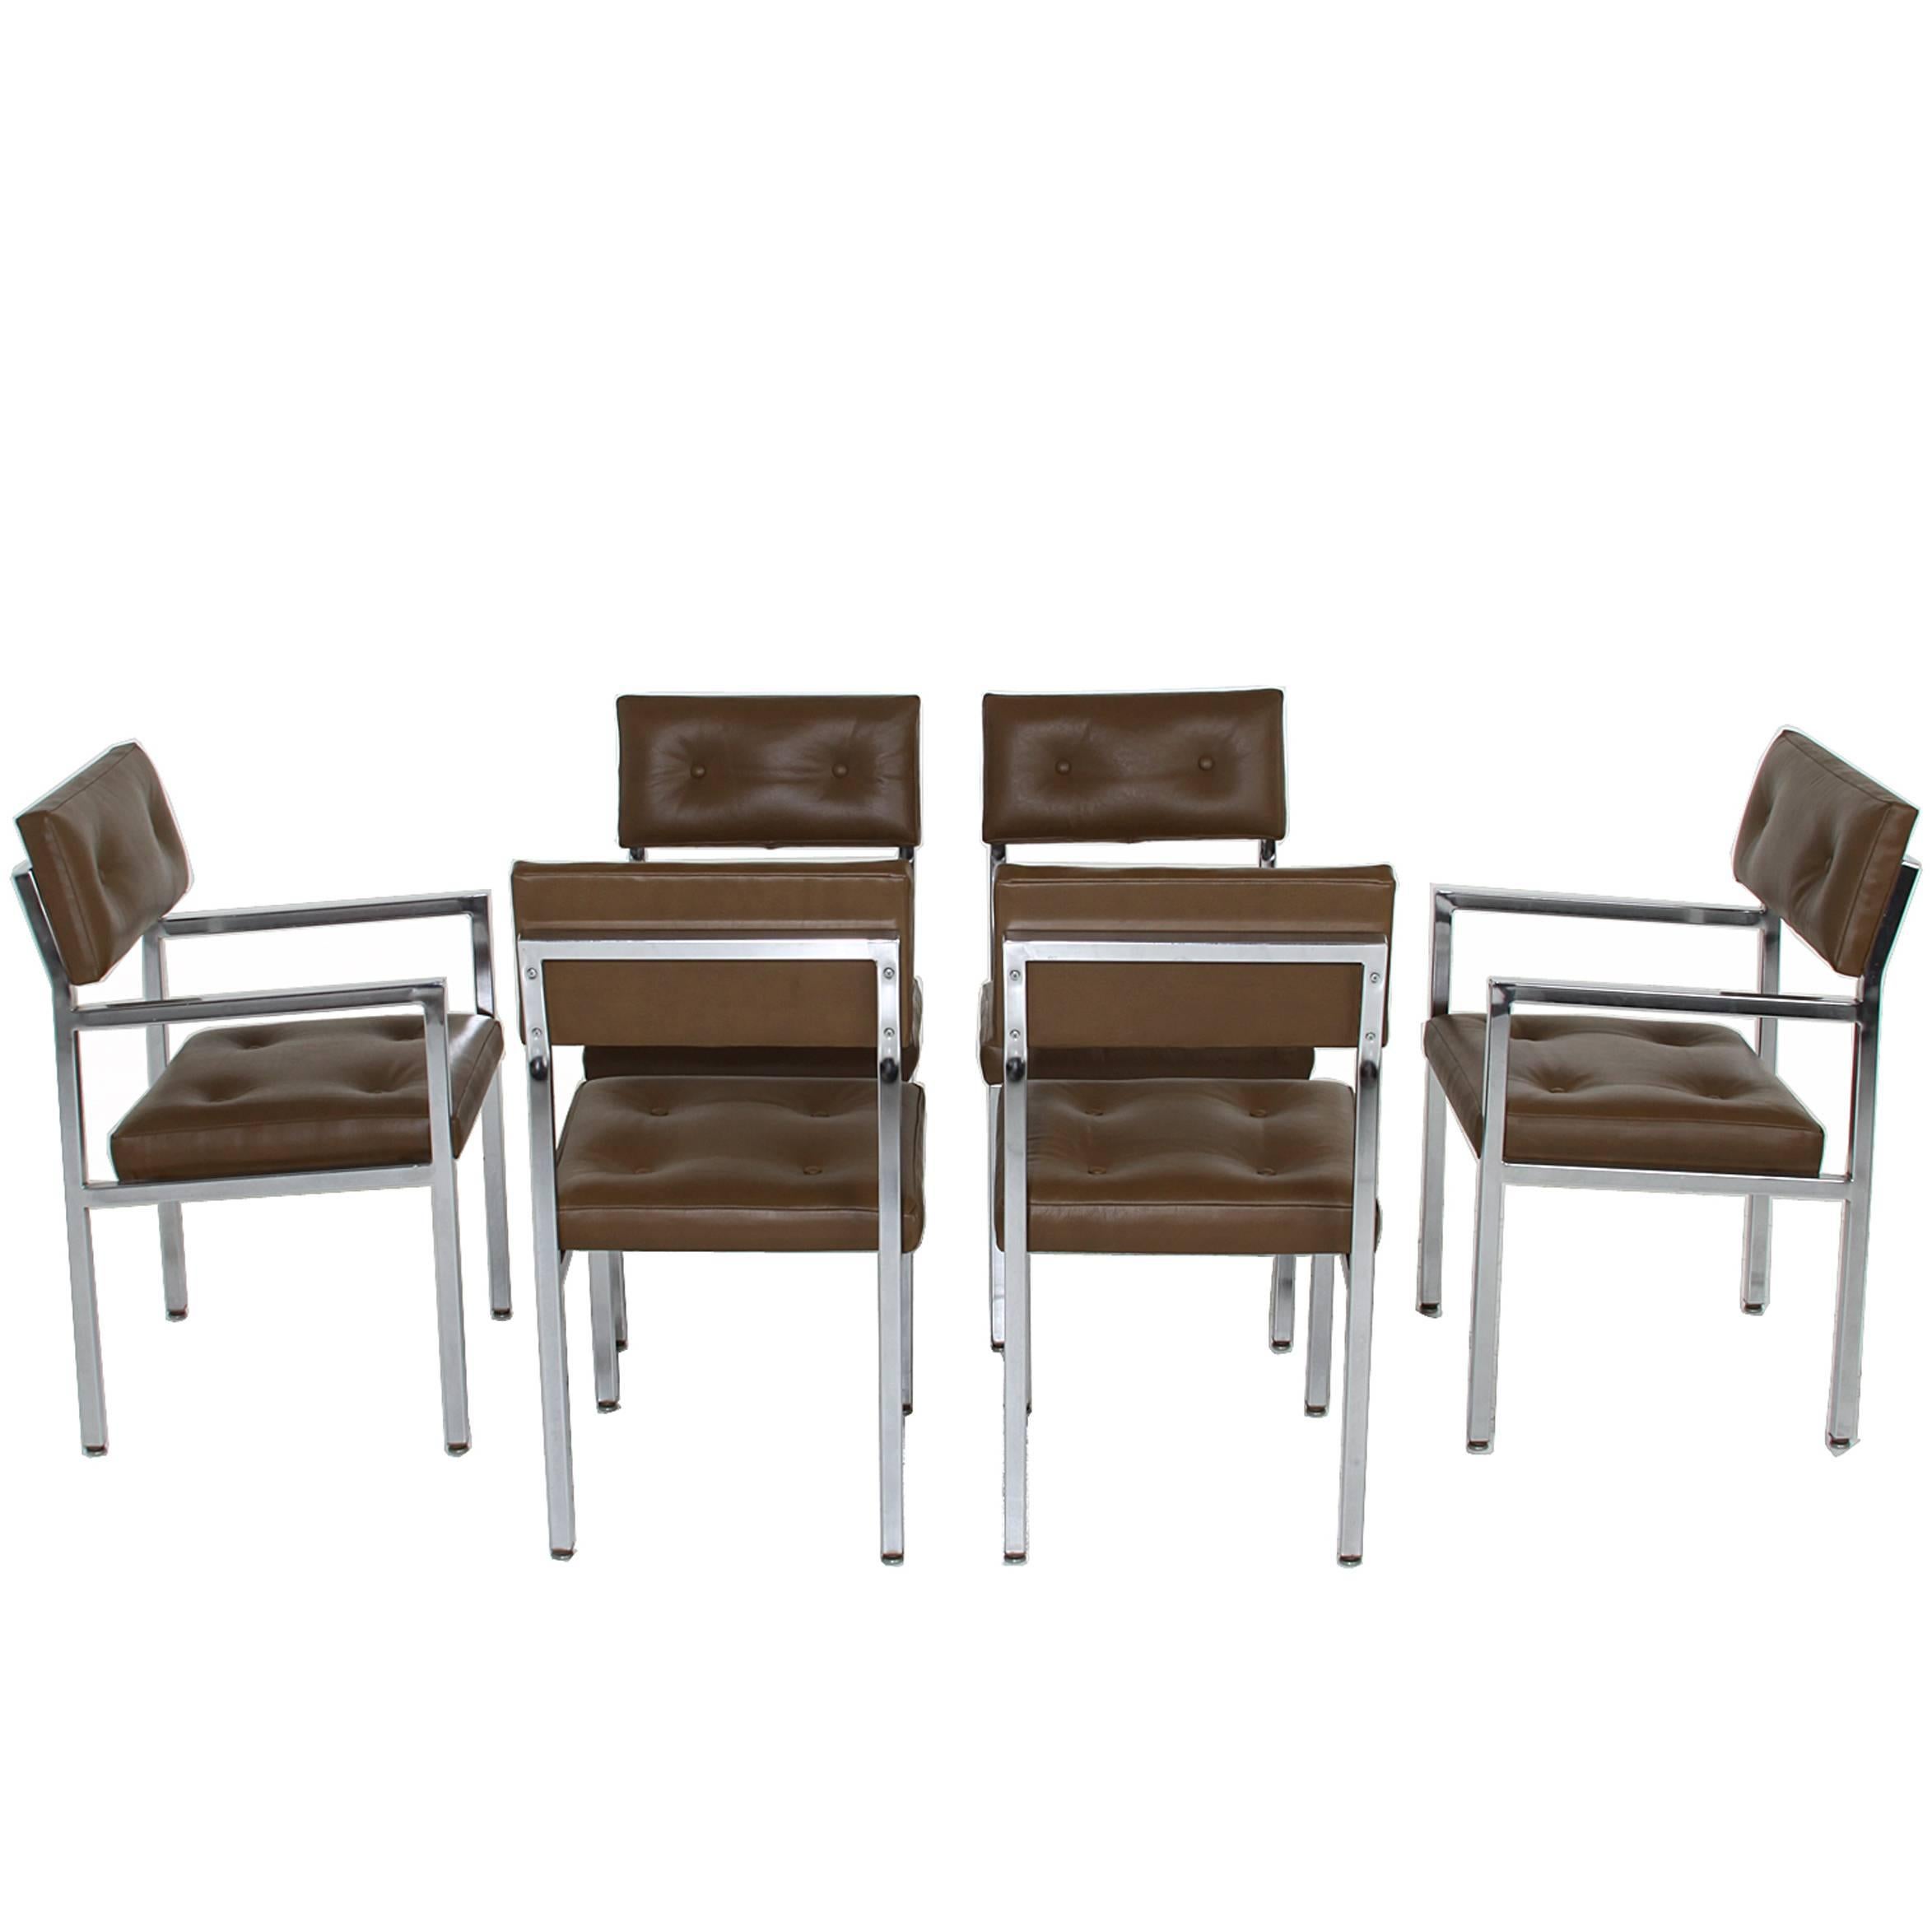 Set of Olive Green Tufted Leather and Chrome Dining Chairs